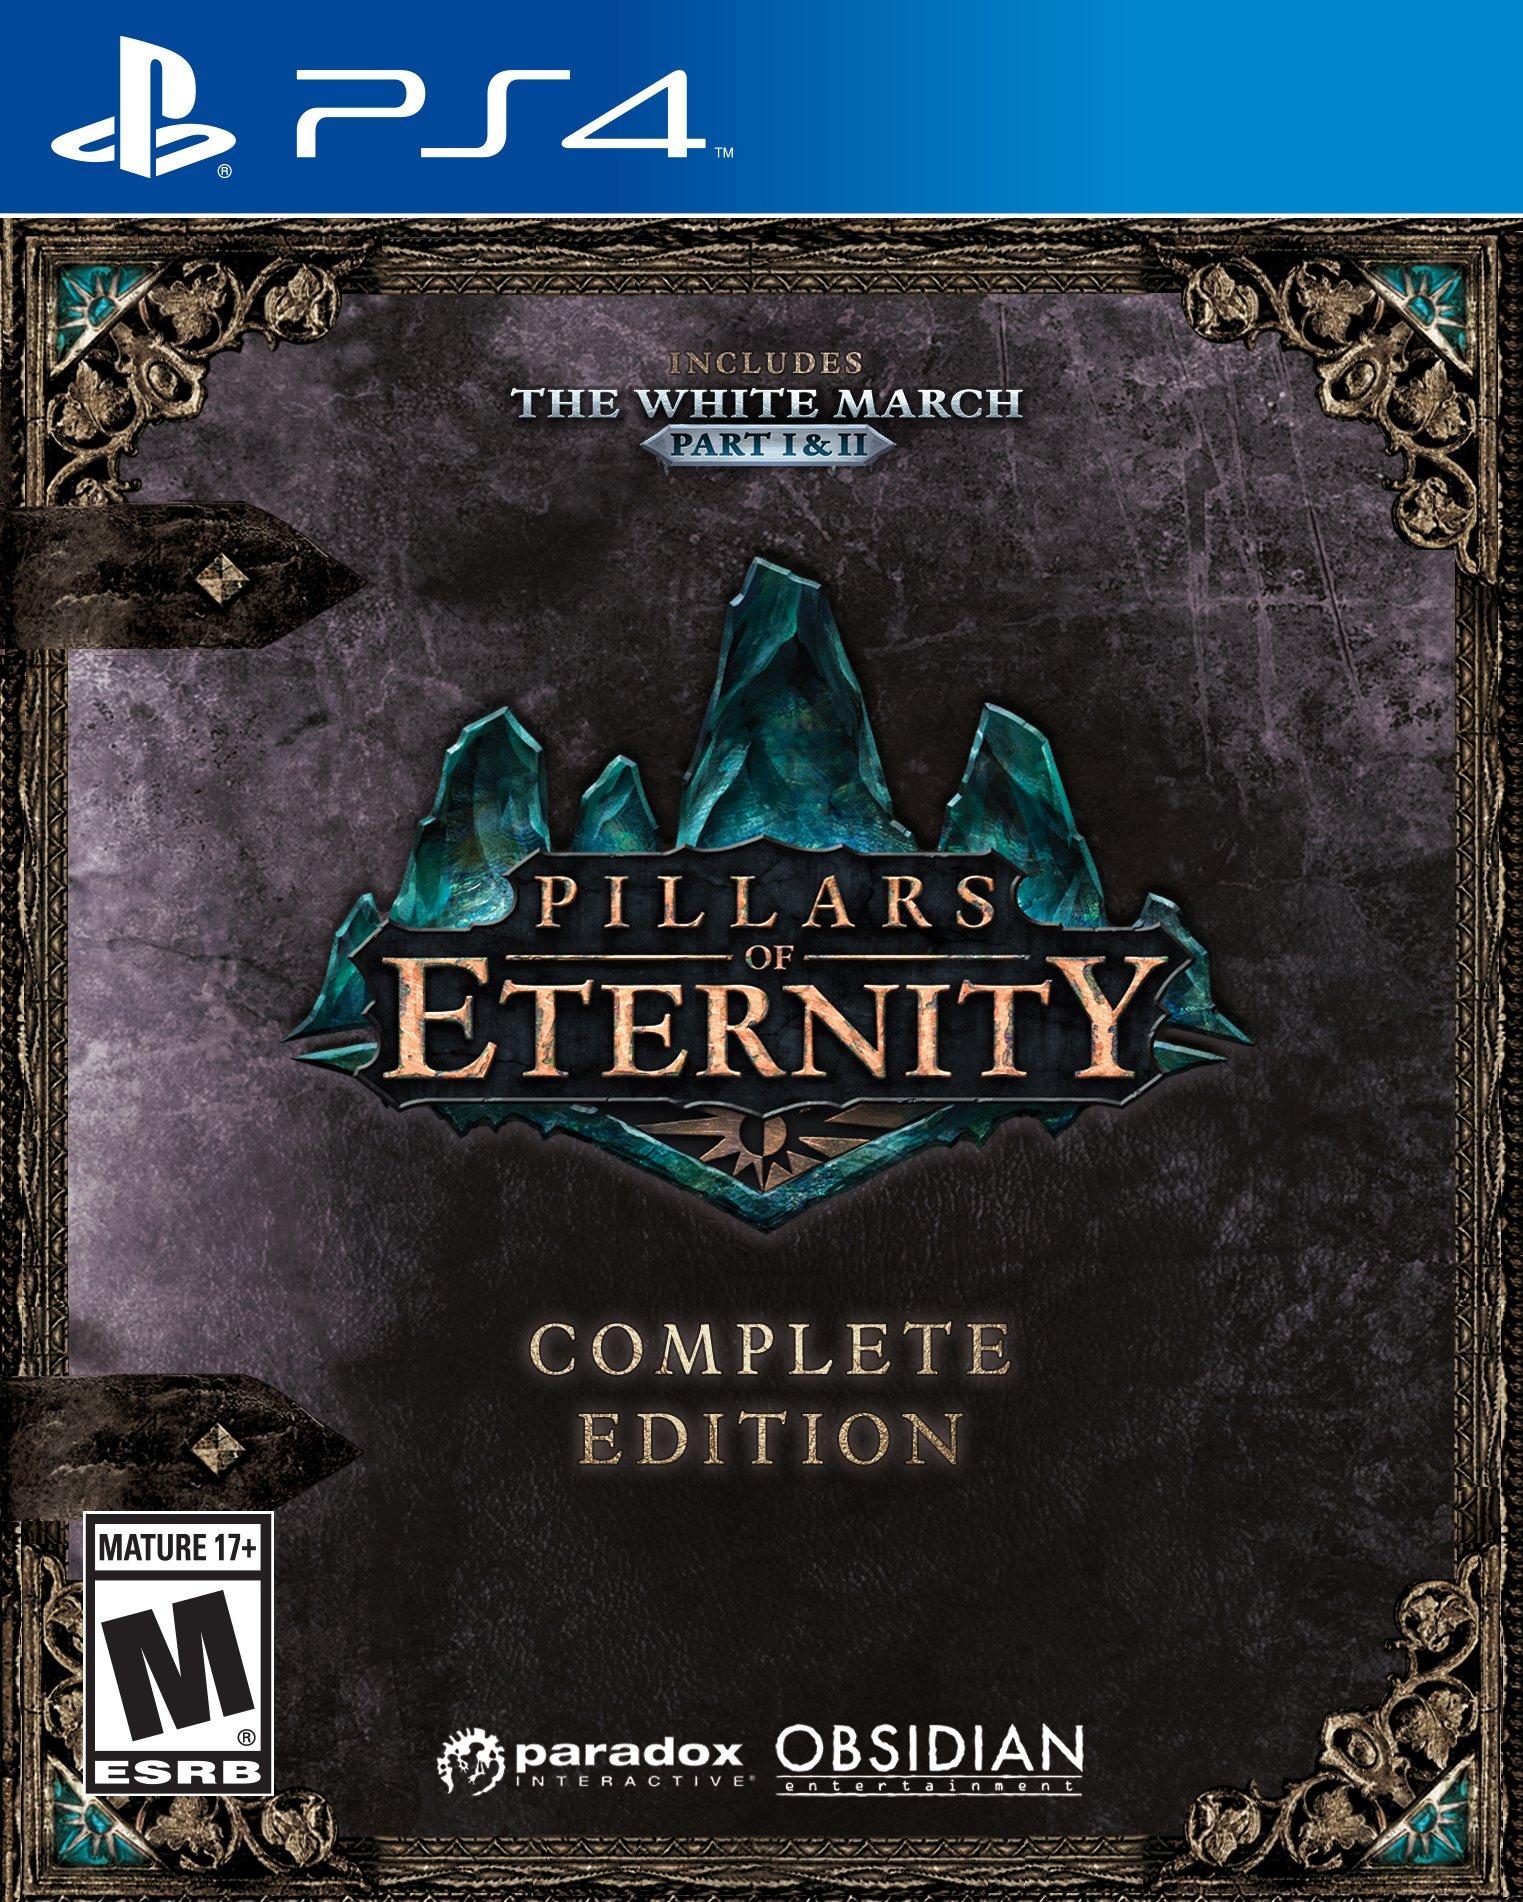 of Eternity Complete Edition - PlayStation 4 | PlayStation 4 GameStop